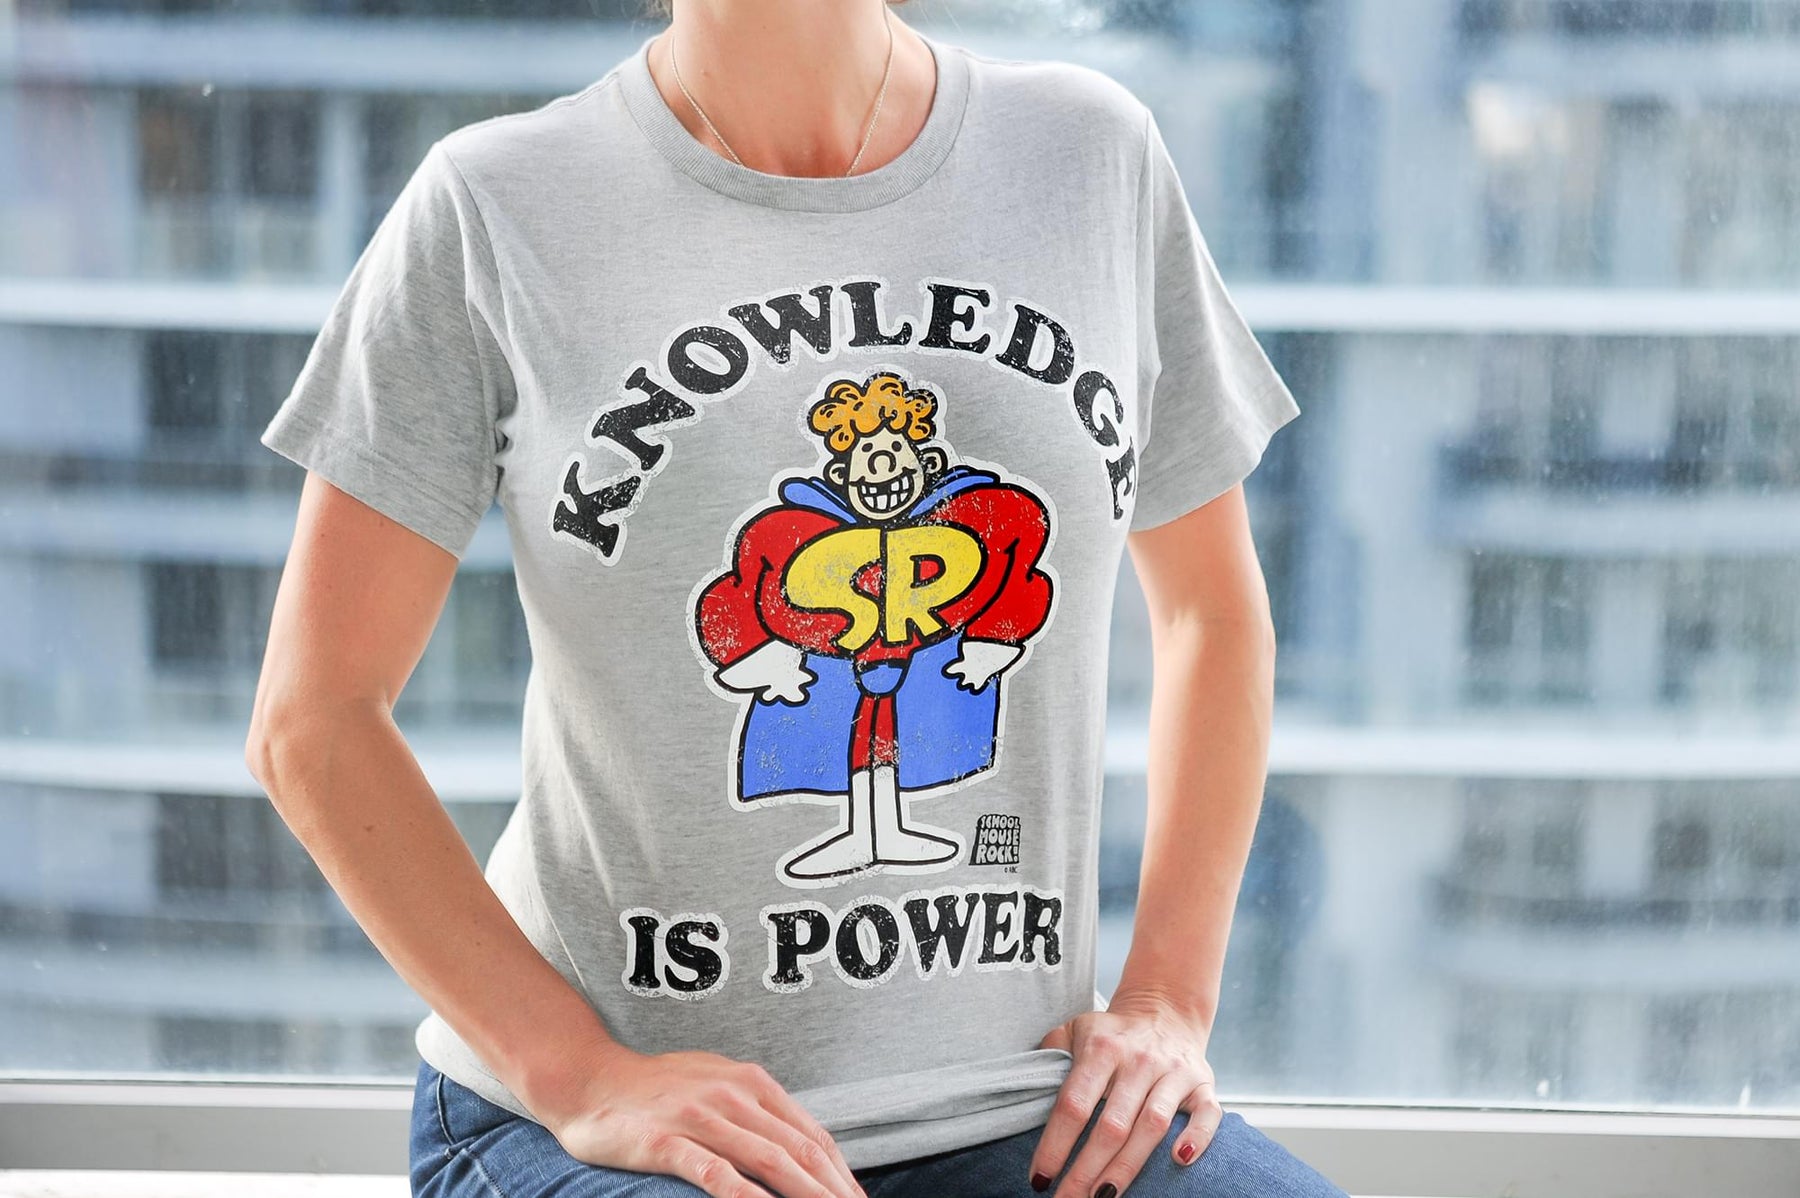 Schoolhouse Rock! “Knowledge Is Power” Adult T-Shirt - Grey